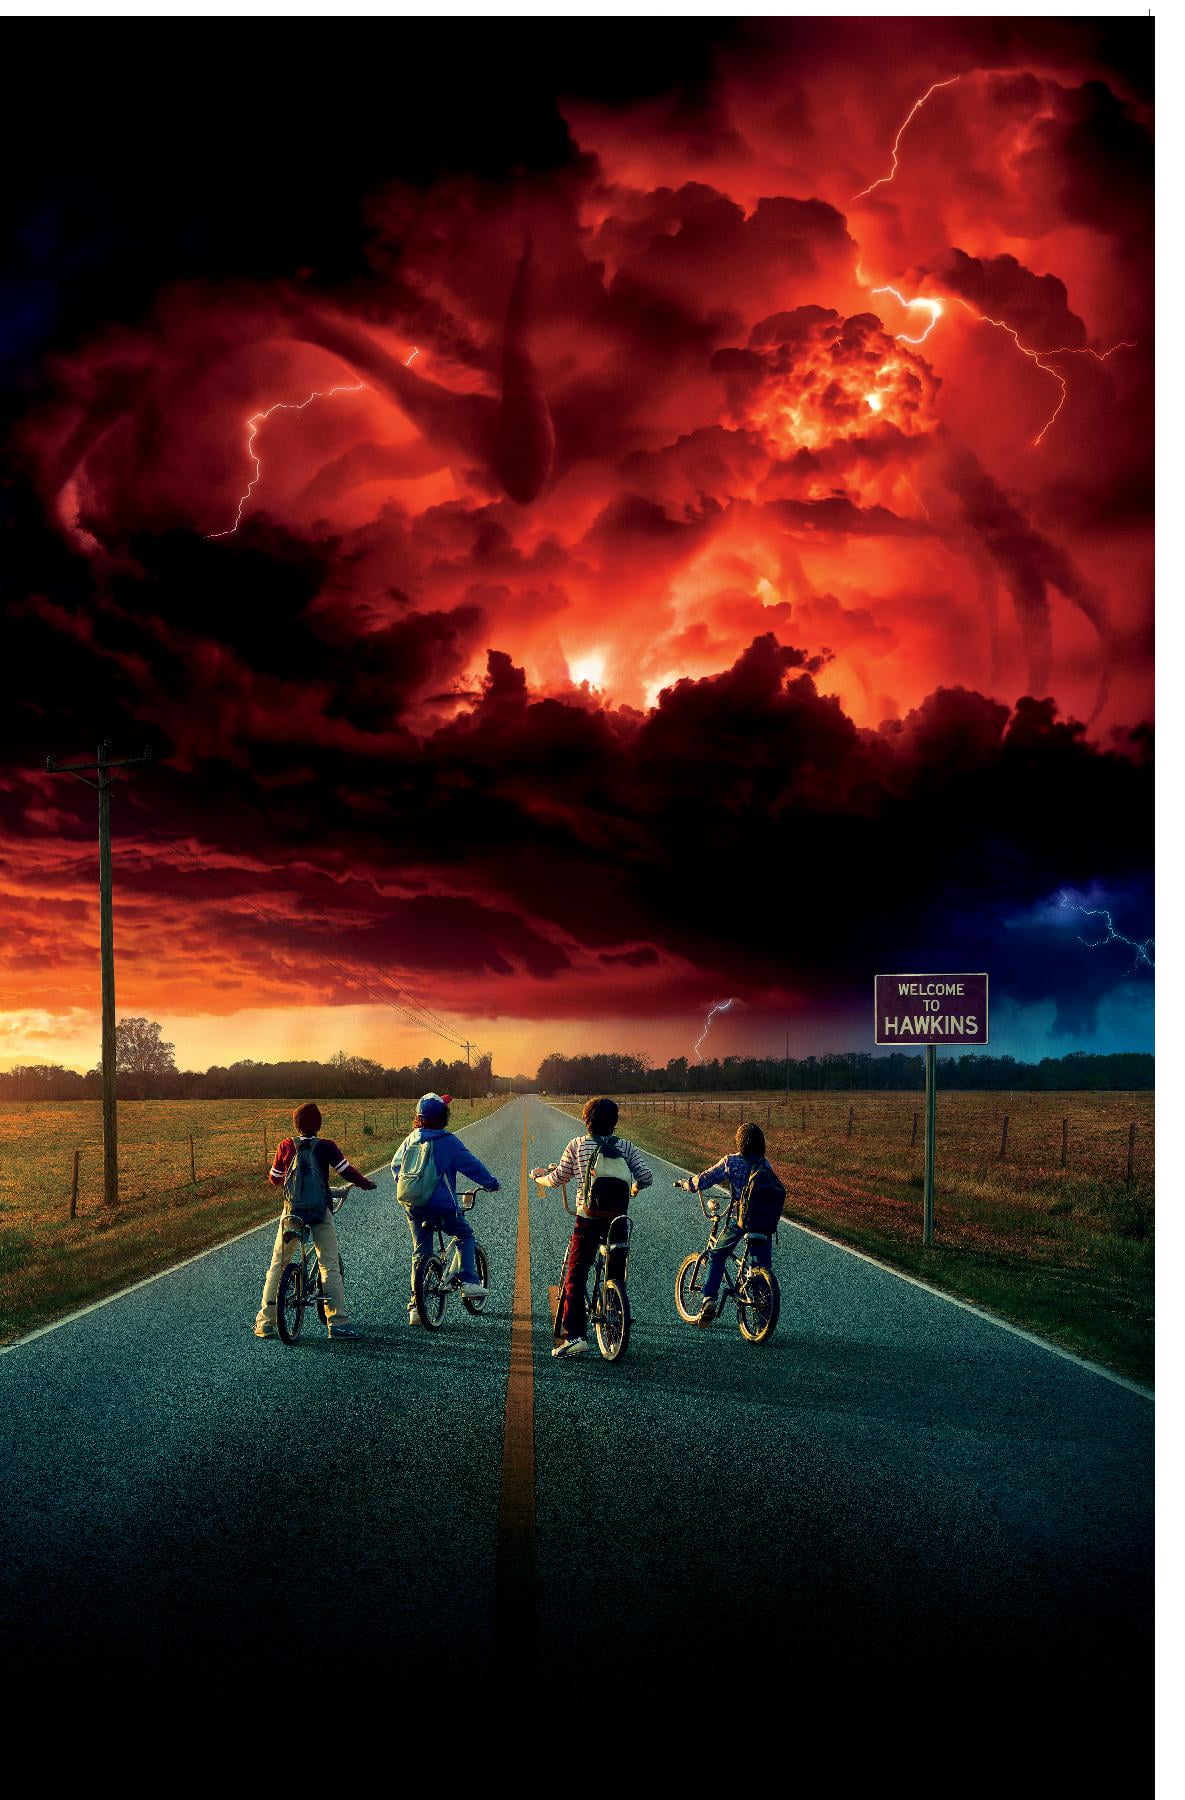 Things Are About To Get Strange Stranger Things Returns For Season 2   VALLEY Magazine